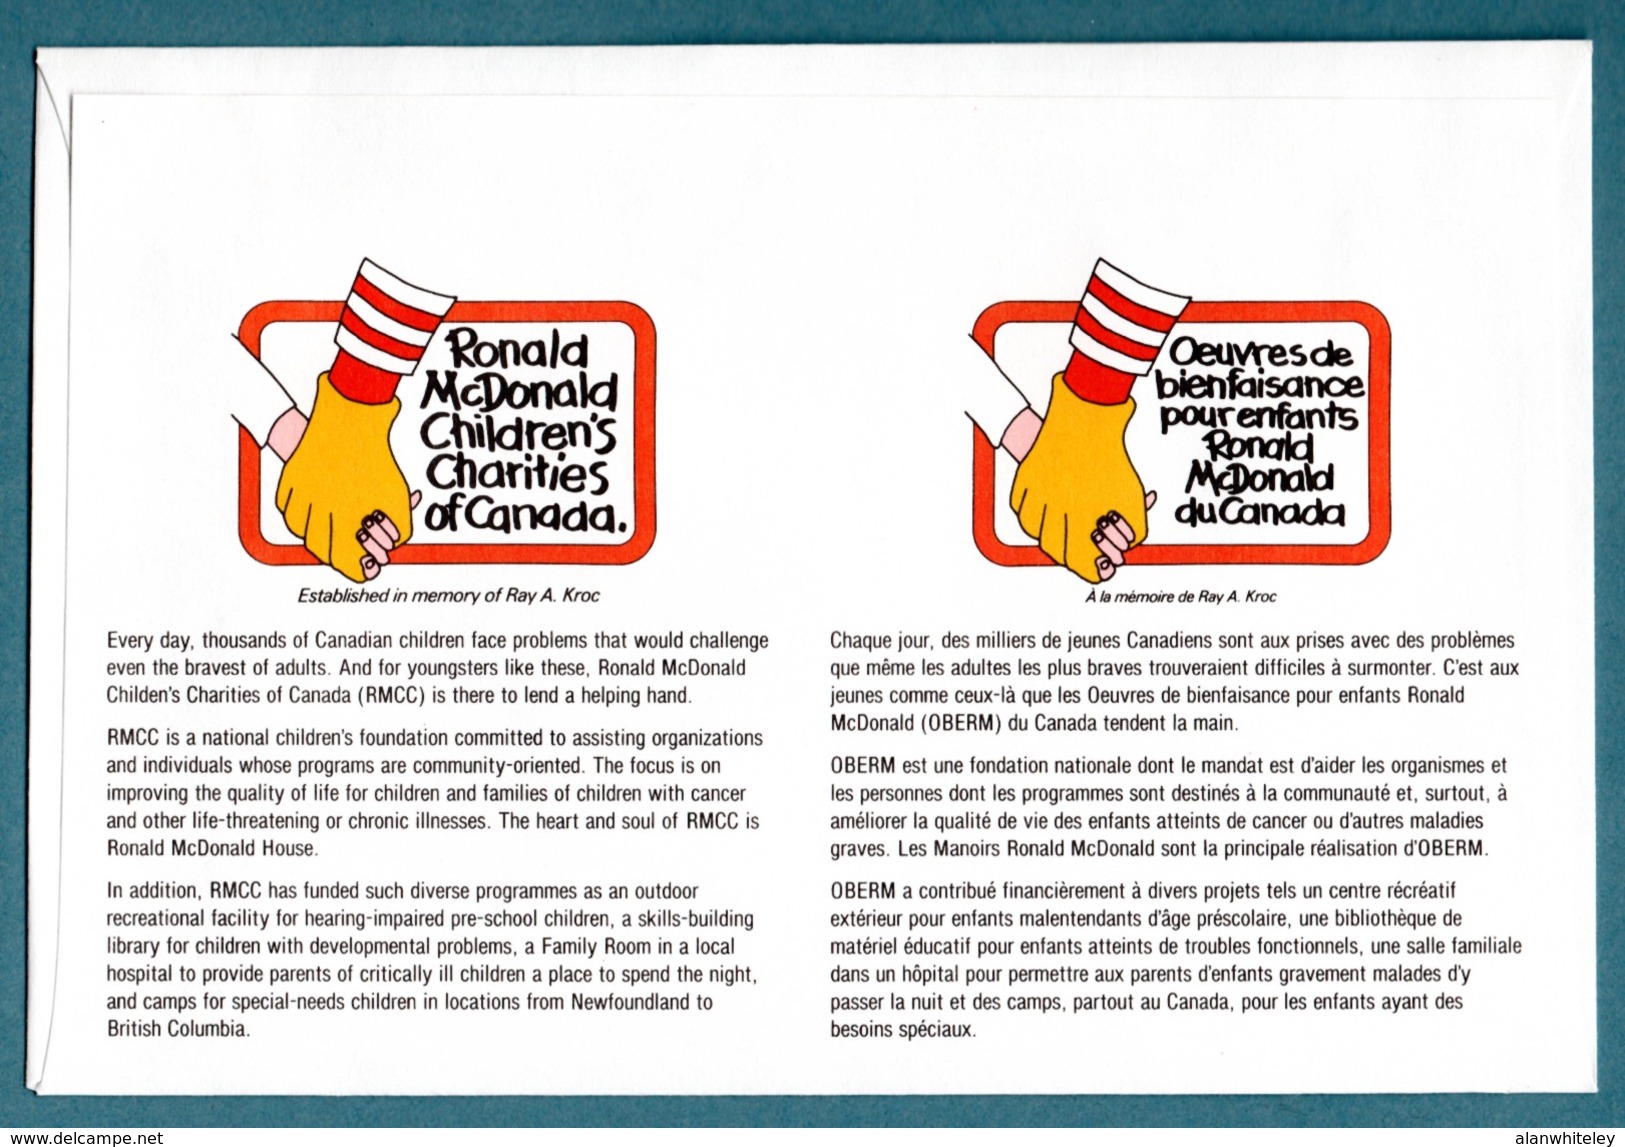 CANADA 1991 Canadian Folktales / McDonalds: Commemorative Cover CANCELLED - Commemorative Covers